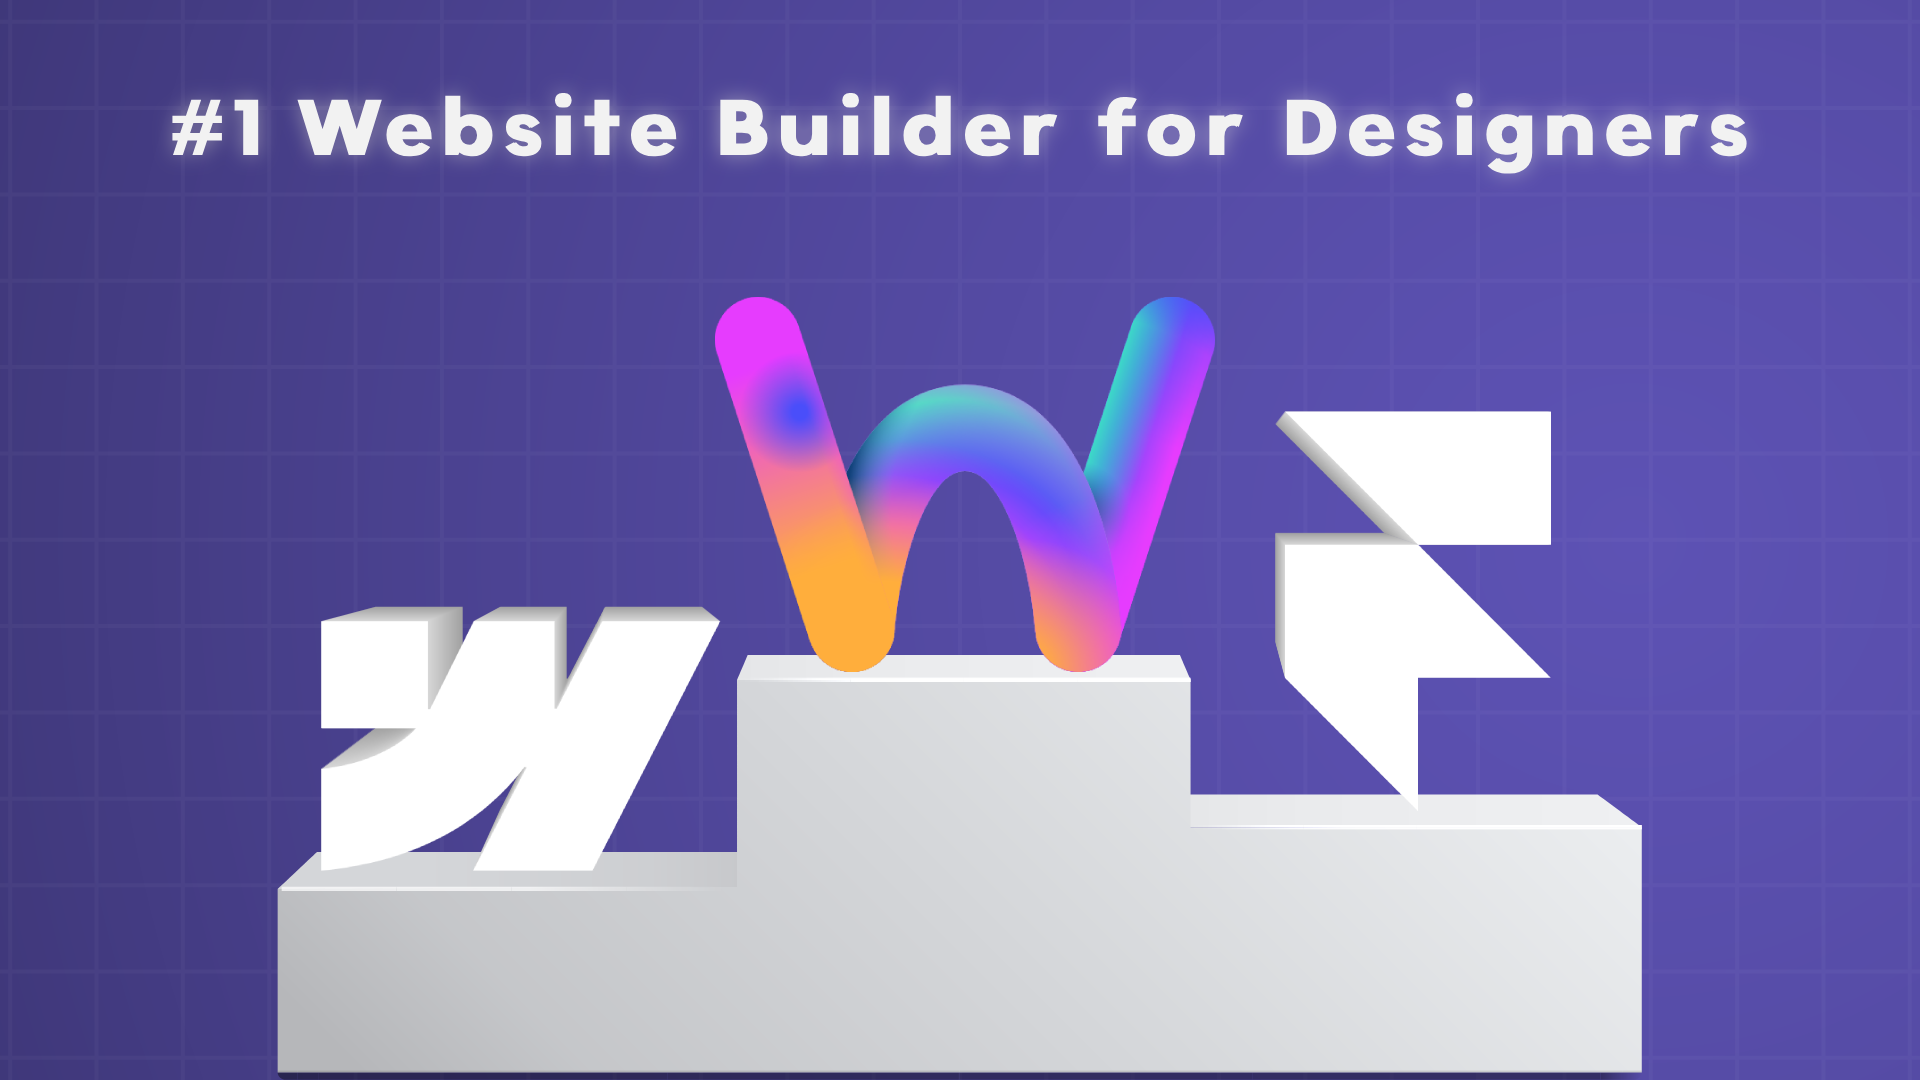 "#1 Website Builder for Designers" with podium of 1st, 2nd, and 3rd place logos